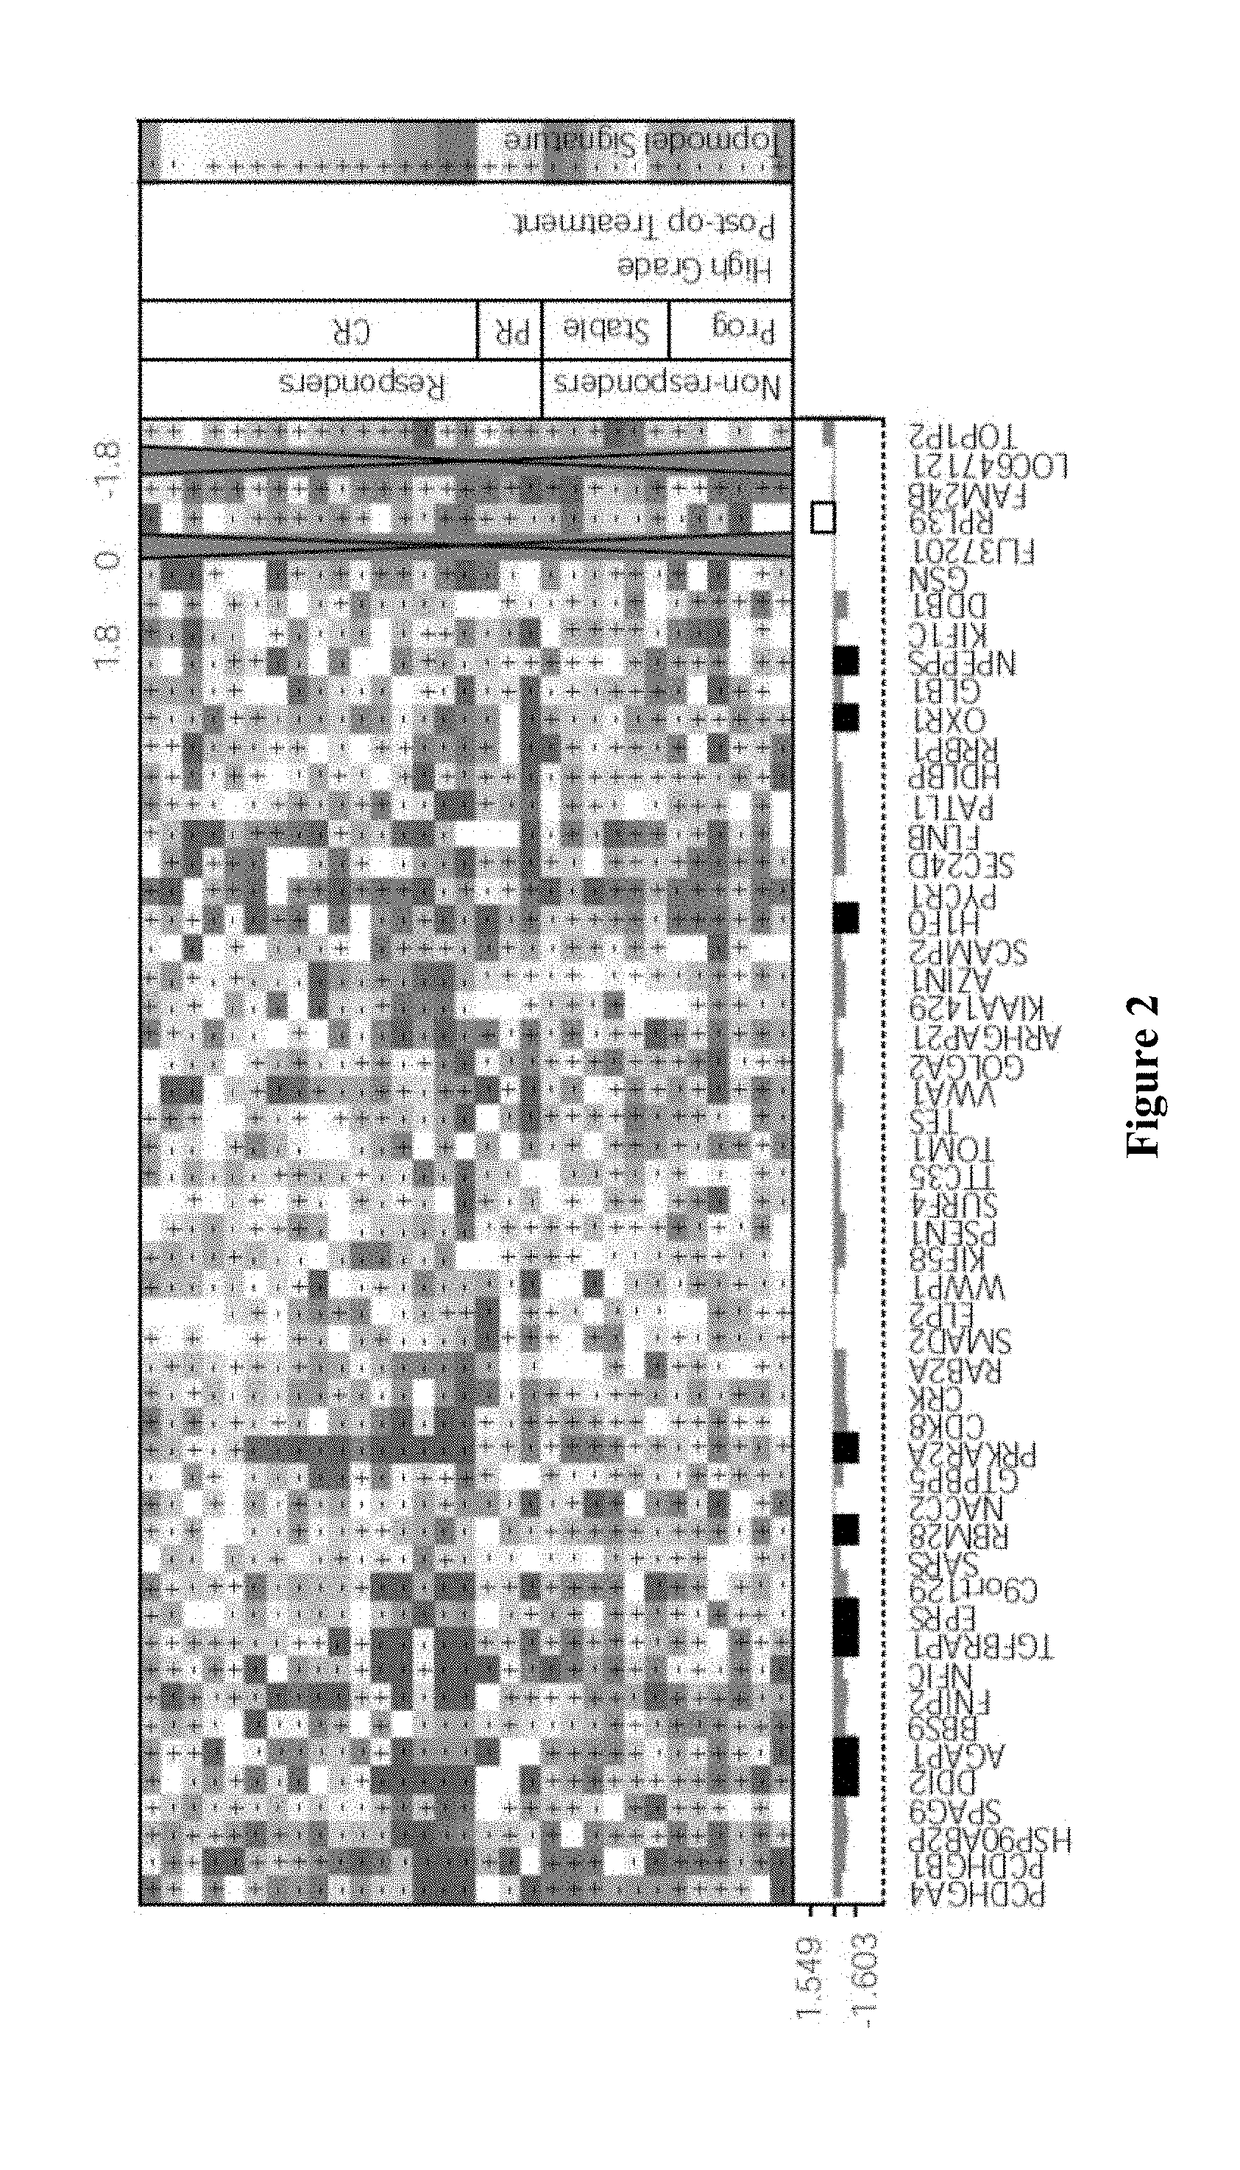 Systems and Methods for Response Prediction to Chemotherapy in High Grade Bladder Cancer